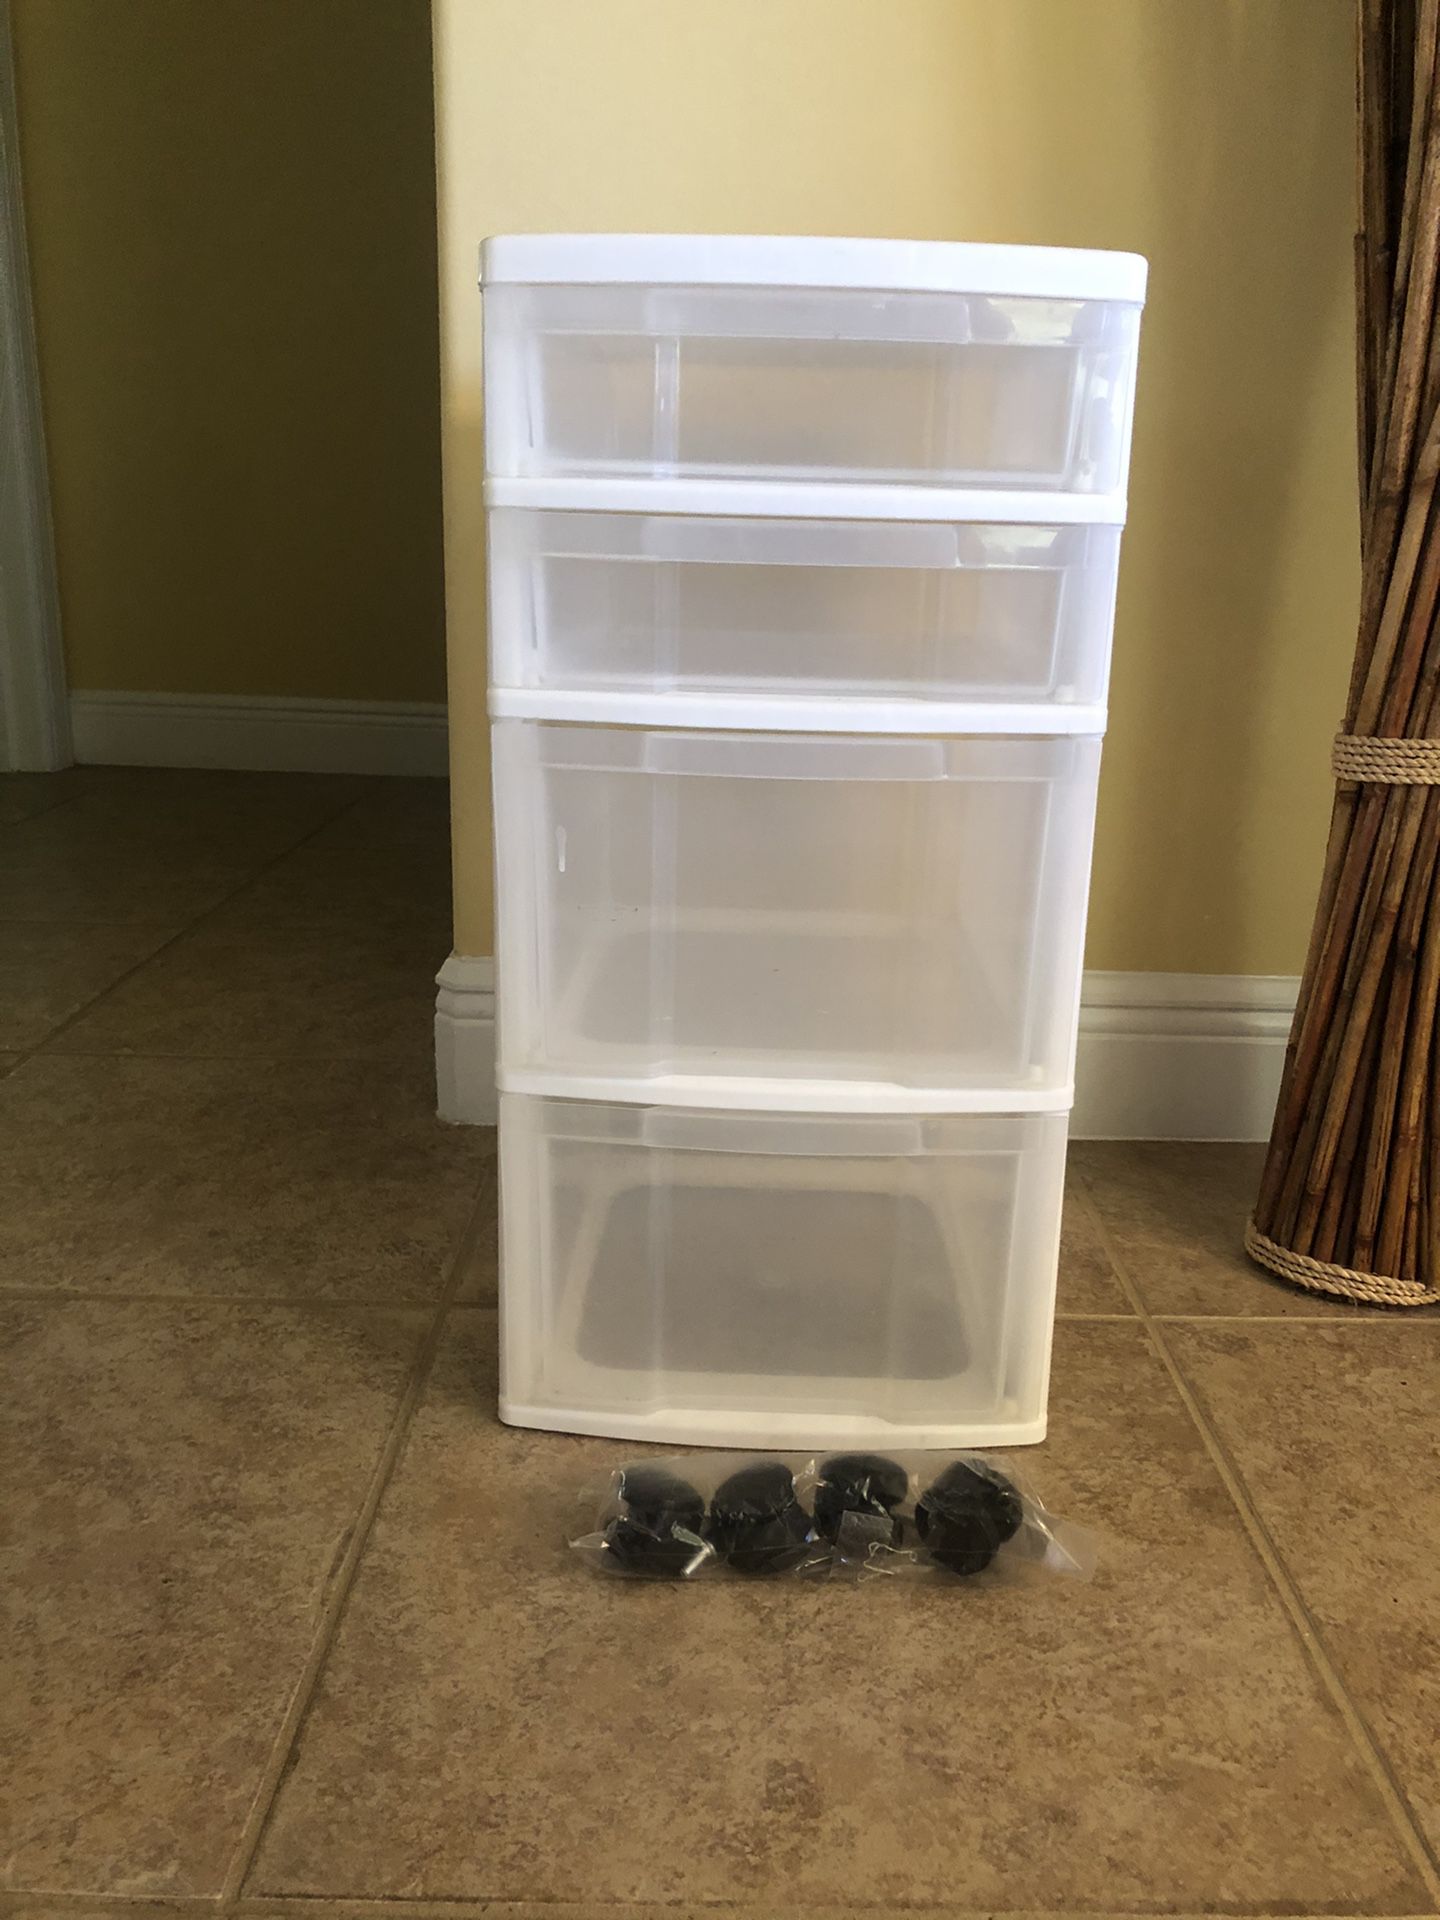 Plastic storage container with drawers and wheels